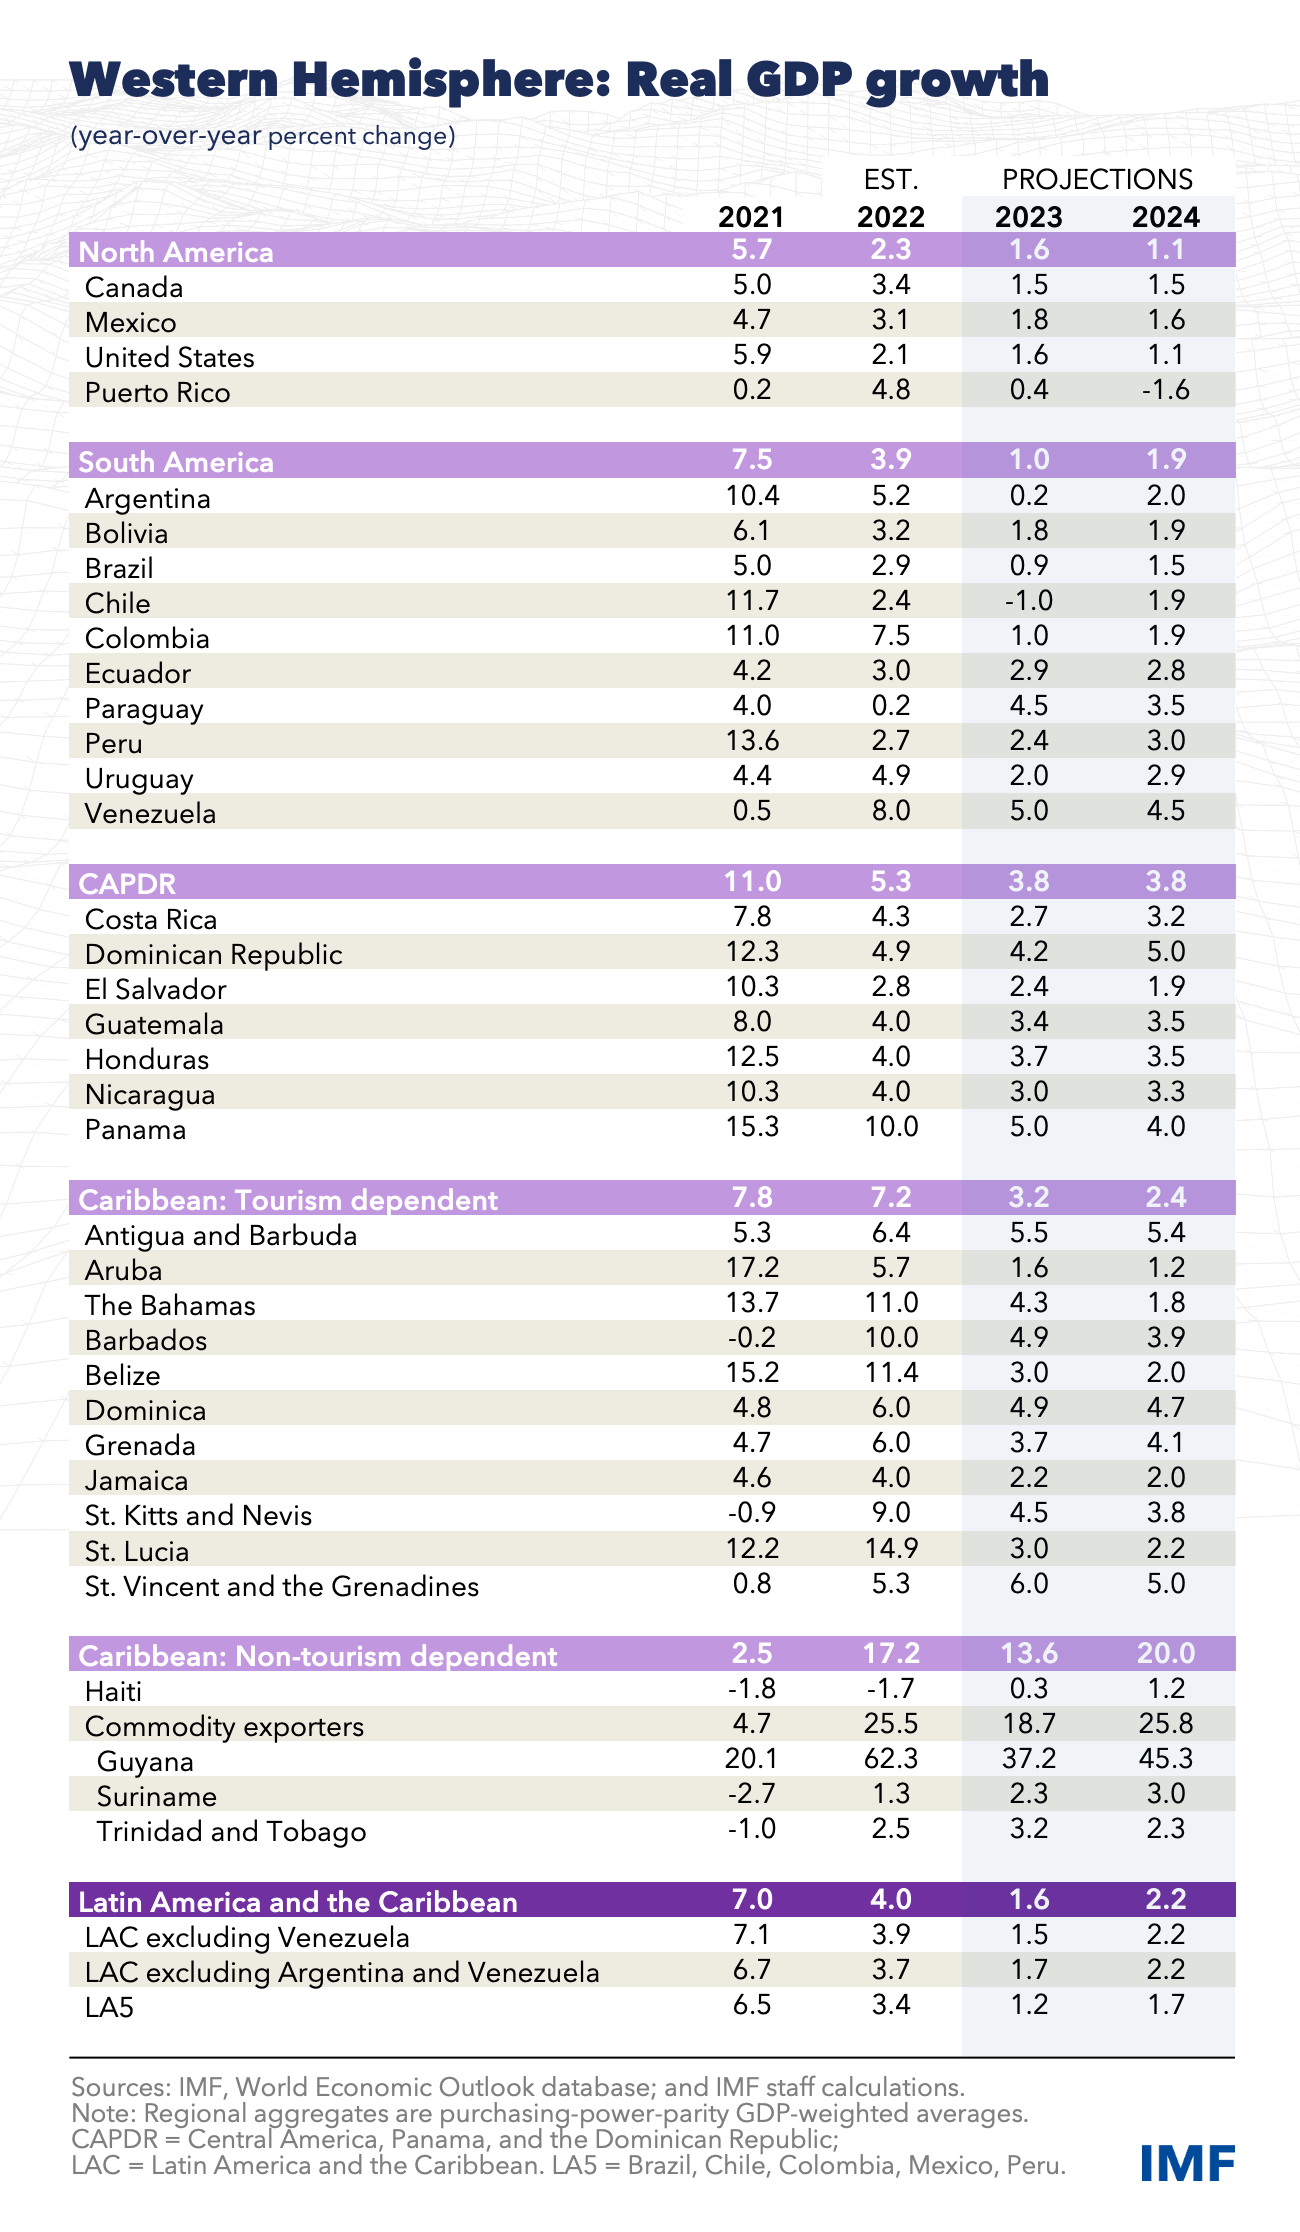 Western Hemisphere: Inflation, end of period, April 2023